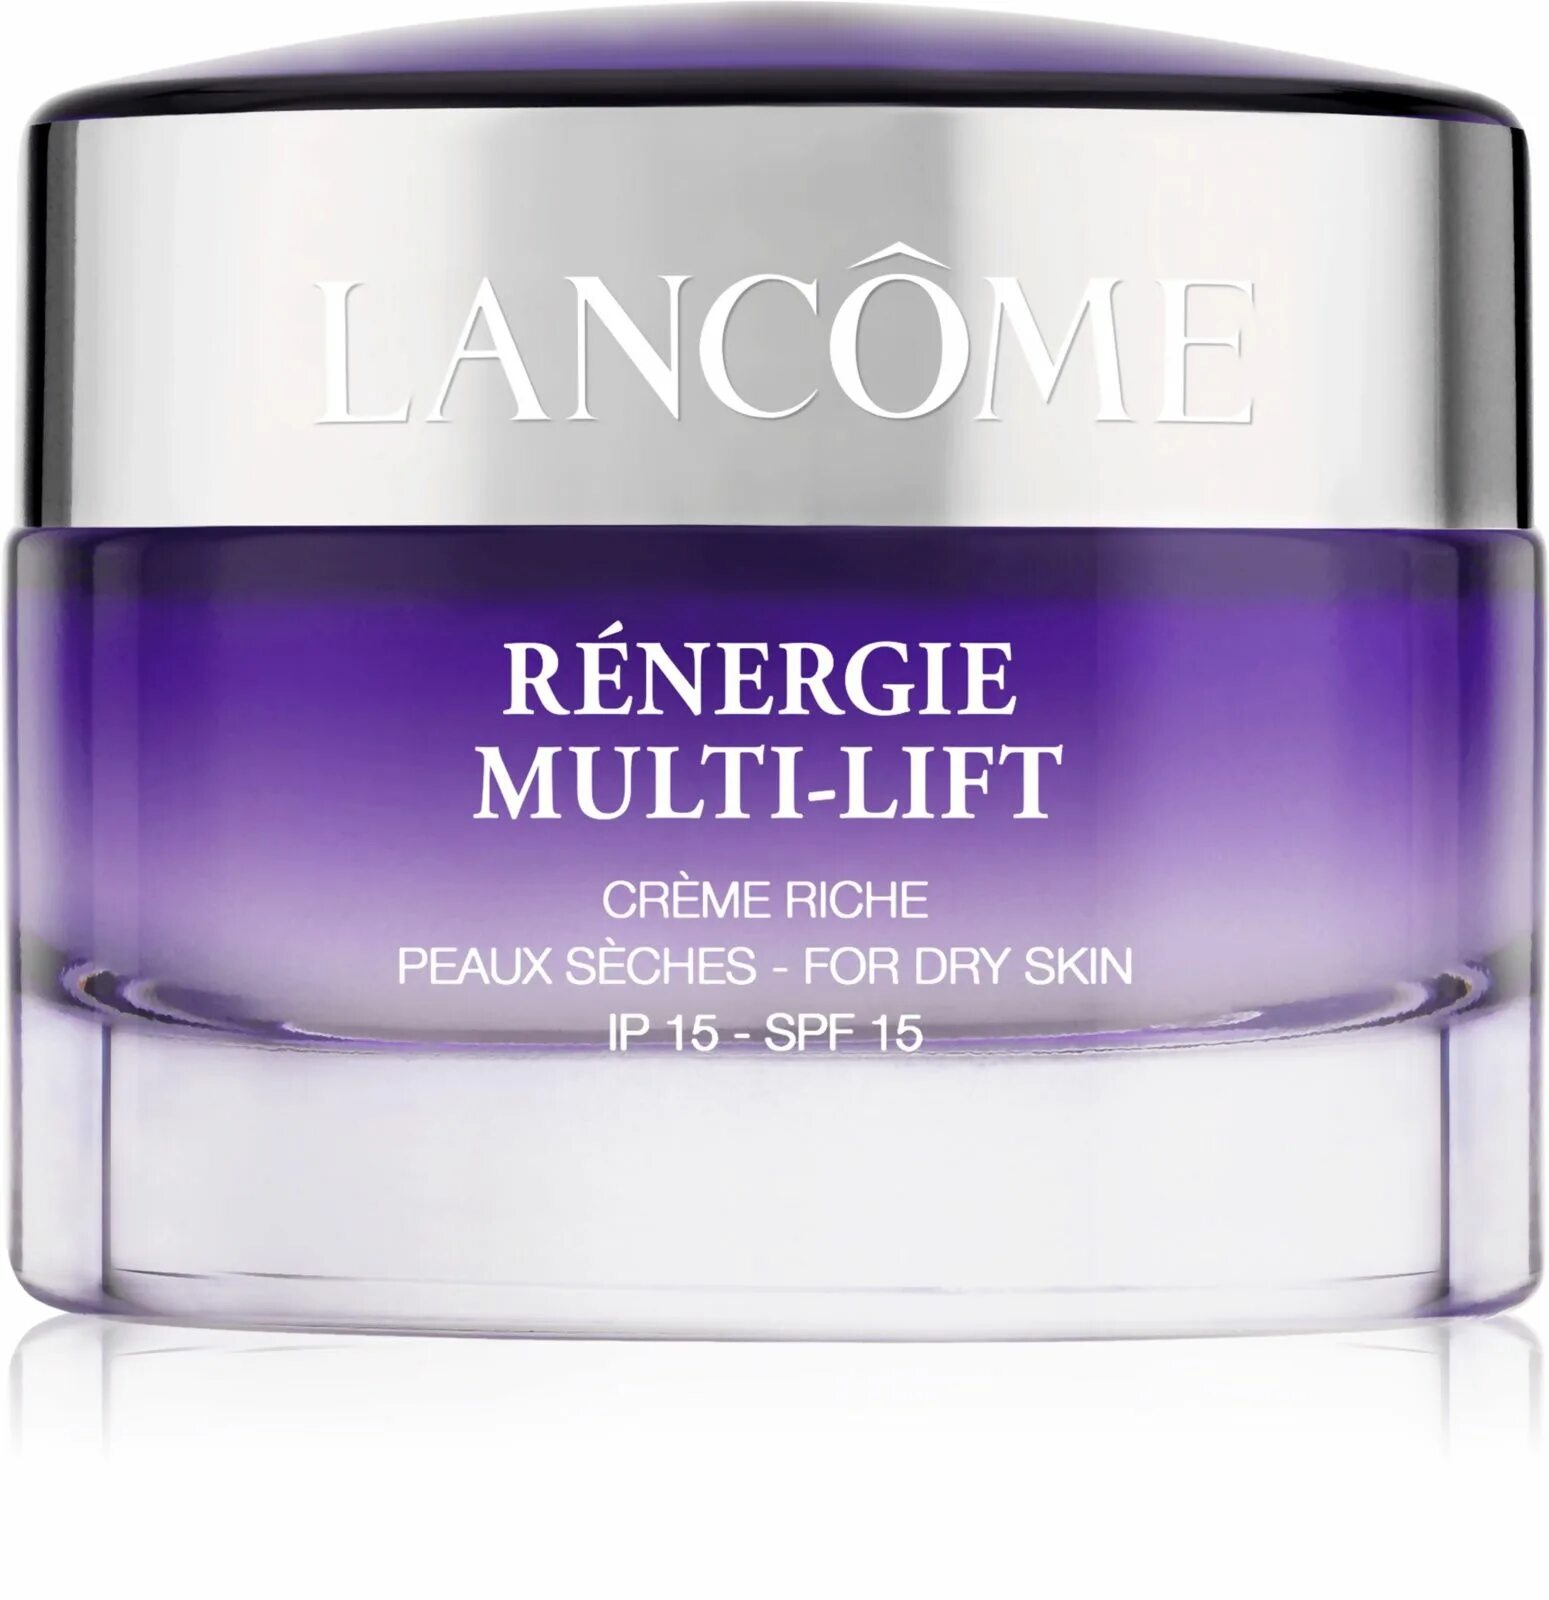 Renergie yeux Multi-Lift / 15 мл. Lancome Renergie. Крем Lancome Renergie. Lancome Renergie Multi-Lift. Купить крем lancome